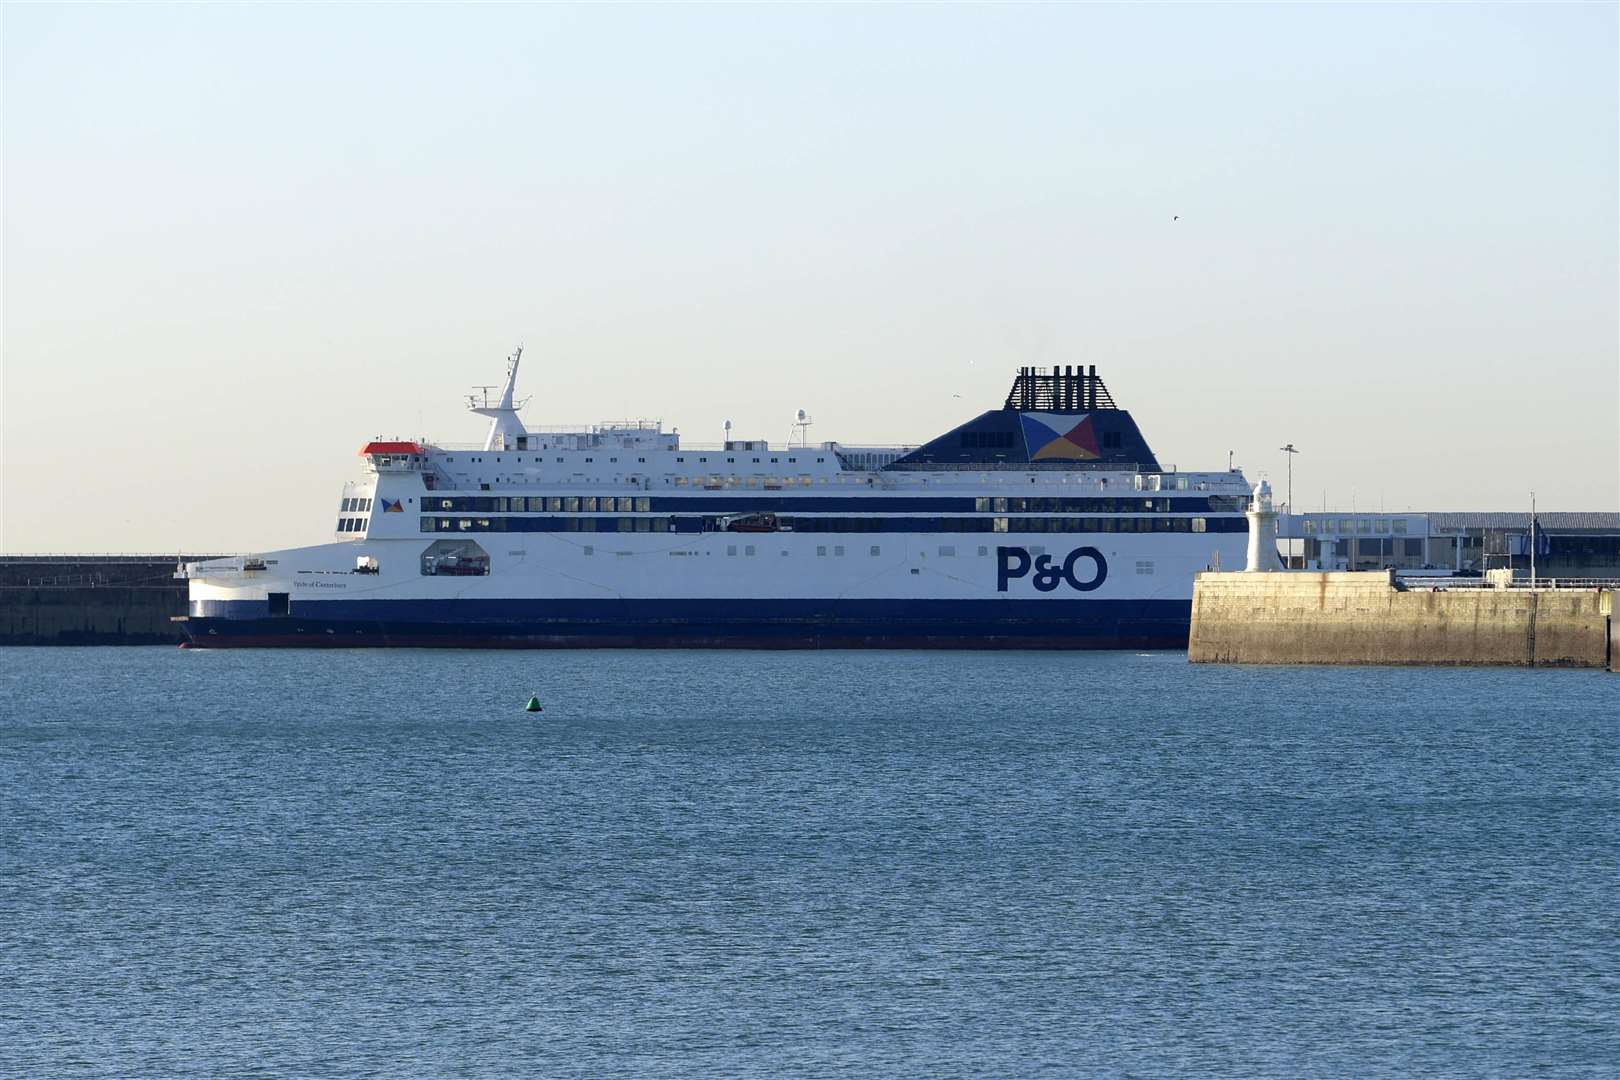 The RMT union called for a 'total boycott' of P&O. Picture: Barry Goodwin